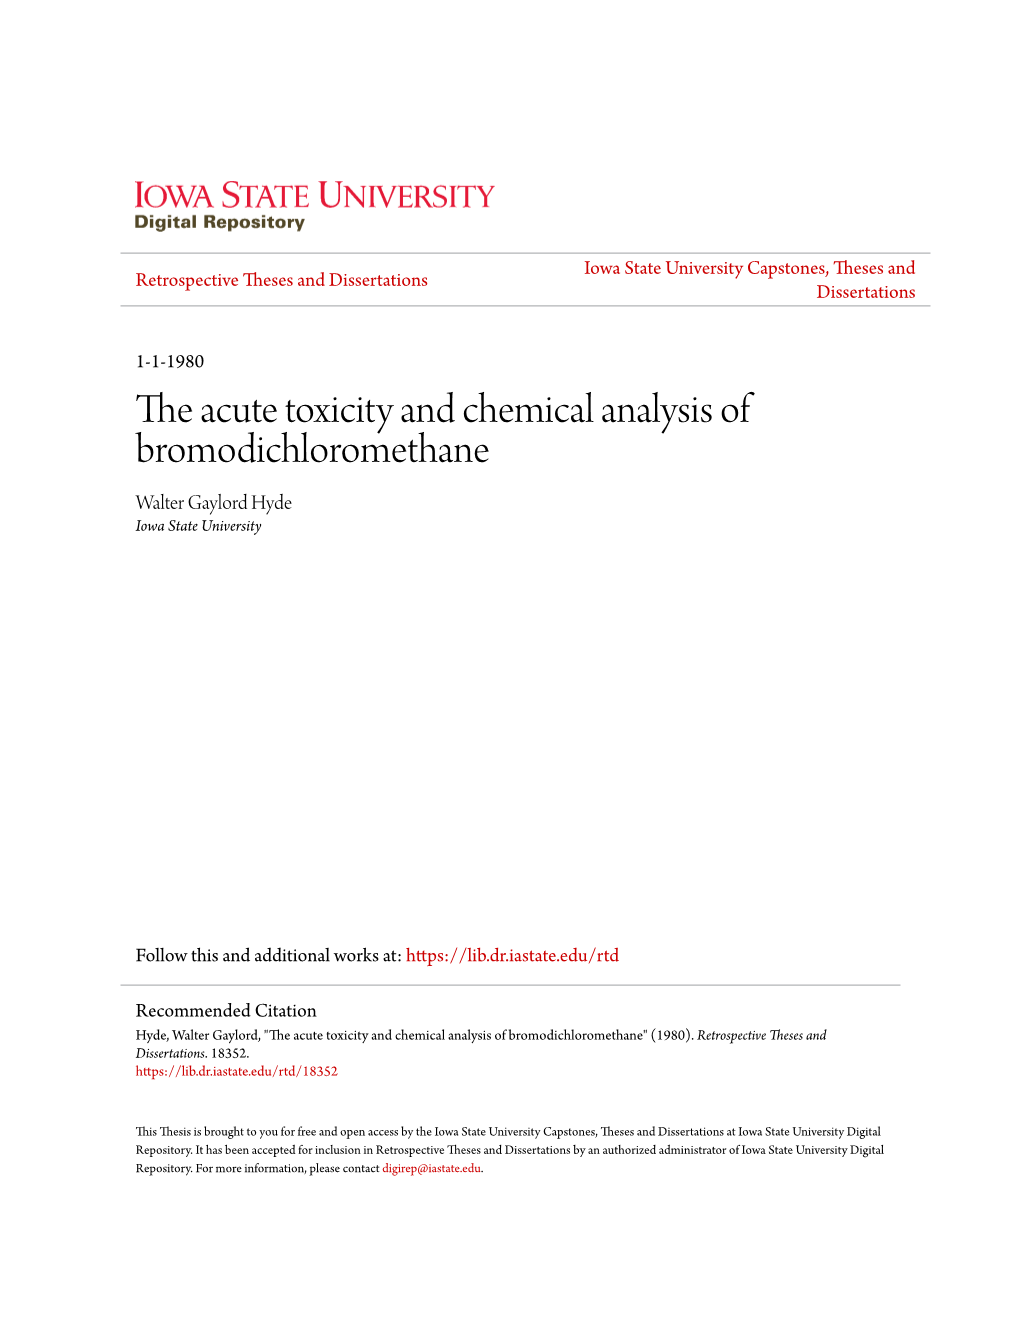 The Acute Toxicity and Chemical Analysis of Bromodichloromethane .F5t/ 198"P 11995' by E